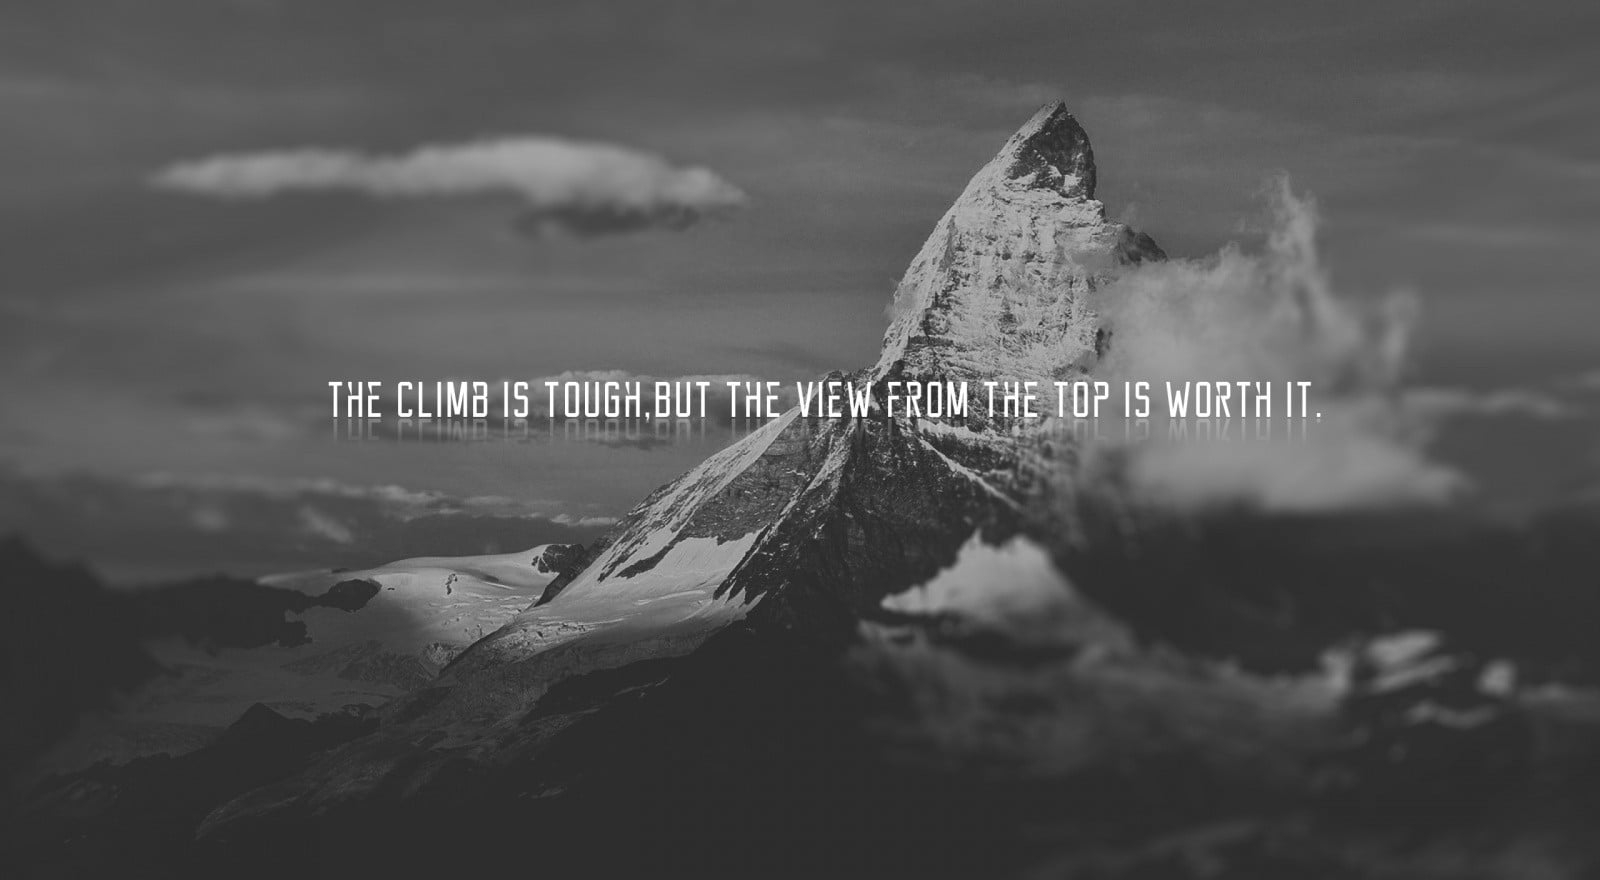 Wallpaper mountain with text overlay, quote, motivational, cloud - sky